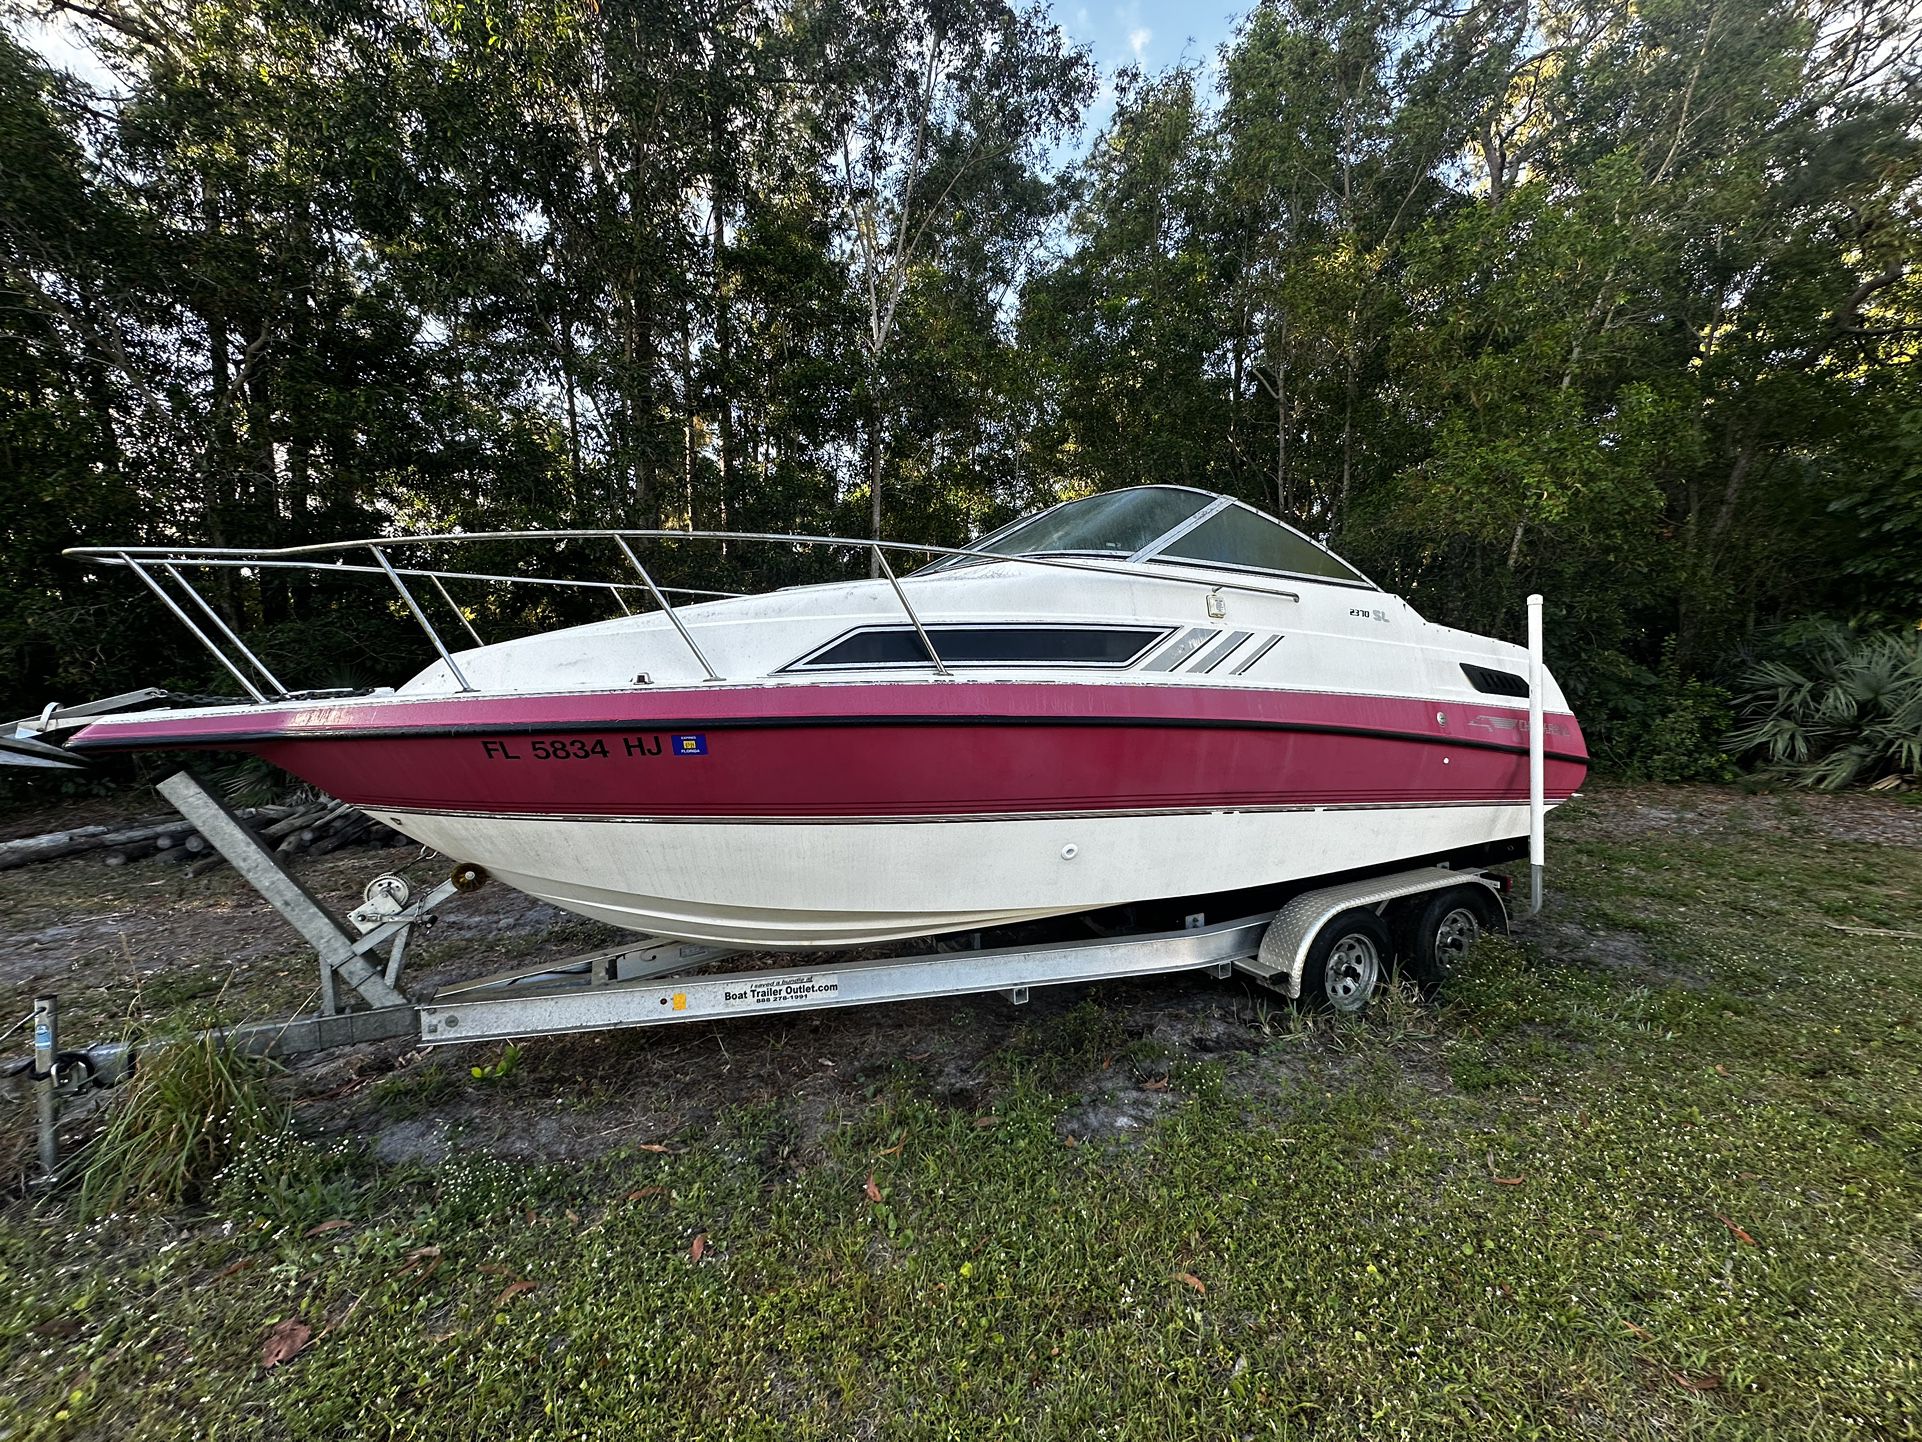 2370 Sl Chapel Boat With Brand New Trailer 